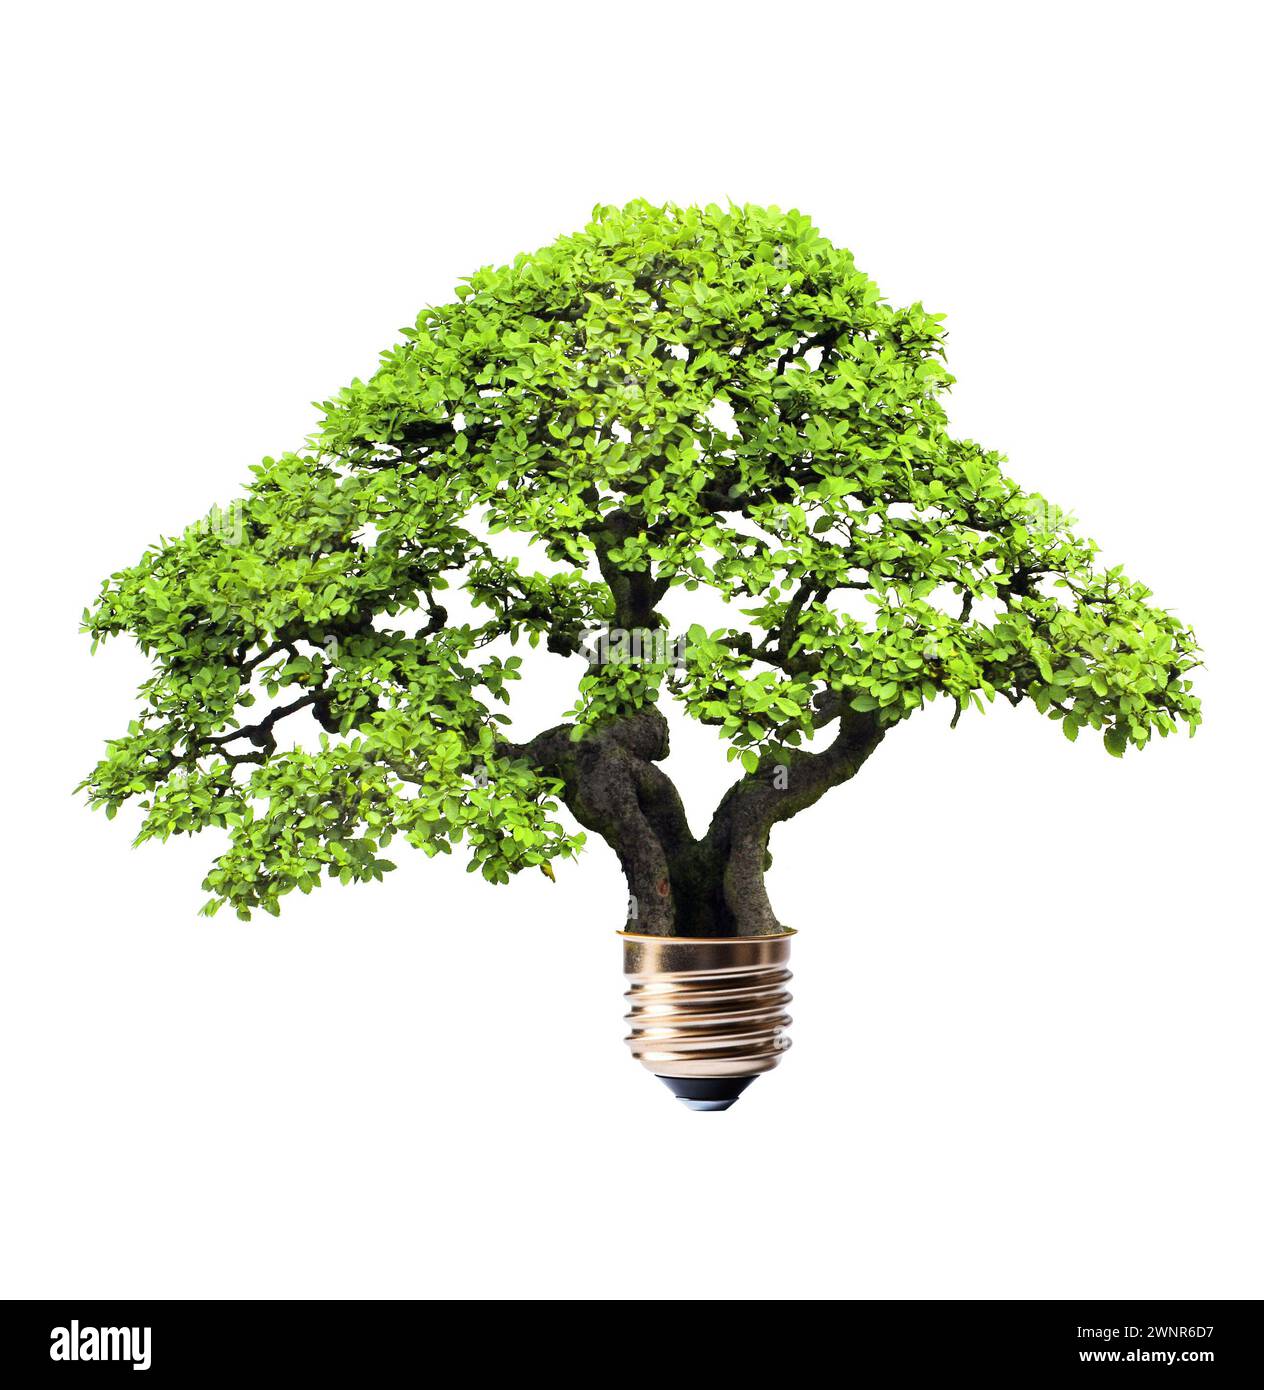 Light bulb with growing green tree. Ecological technology,  eco friendly, sustainable environment, Saving energy, conserving resource concept. Isolate Stock Photo